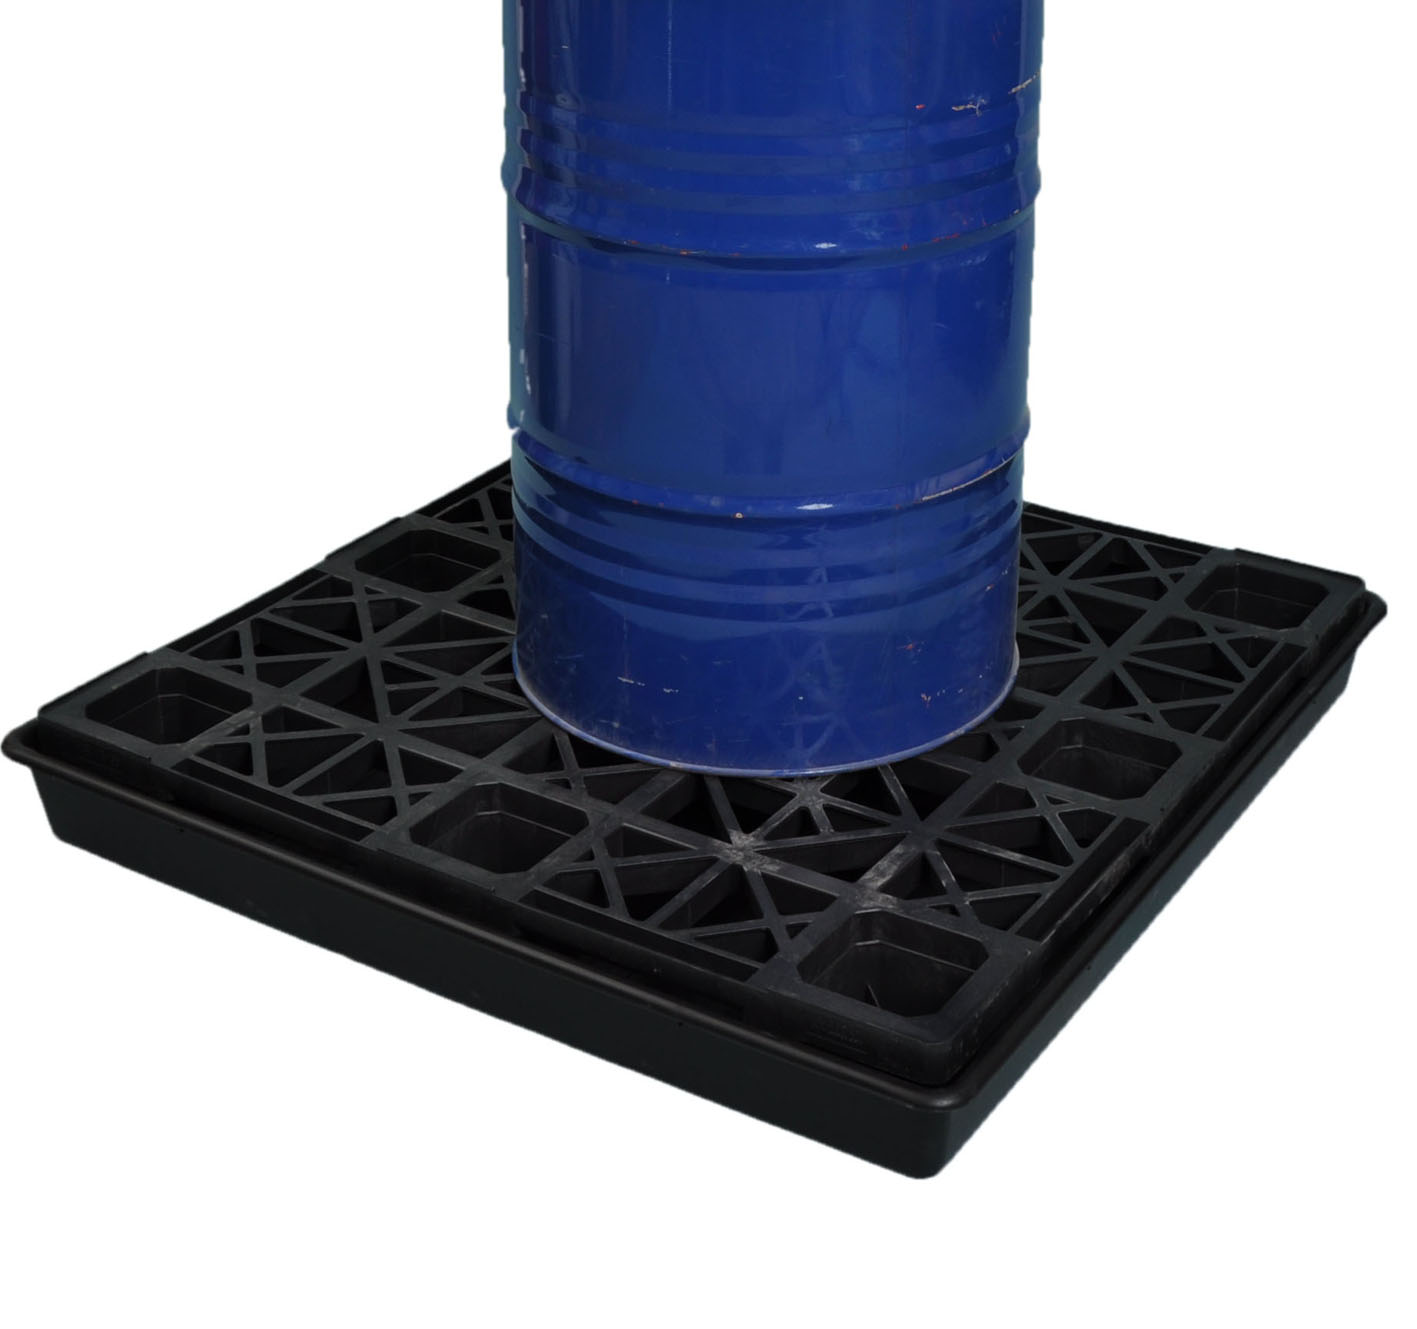 Waste Oil Collection Spill Pallet